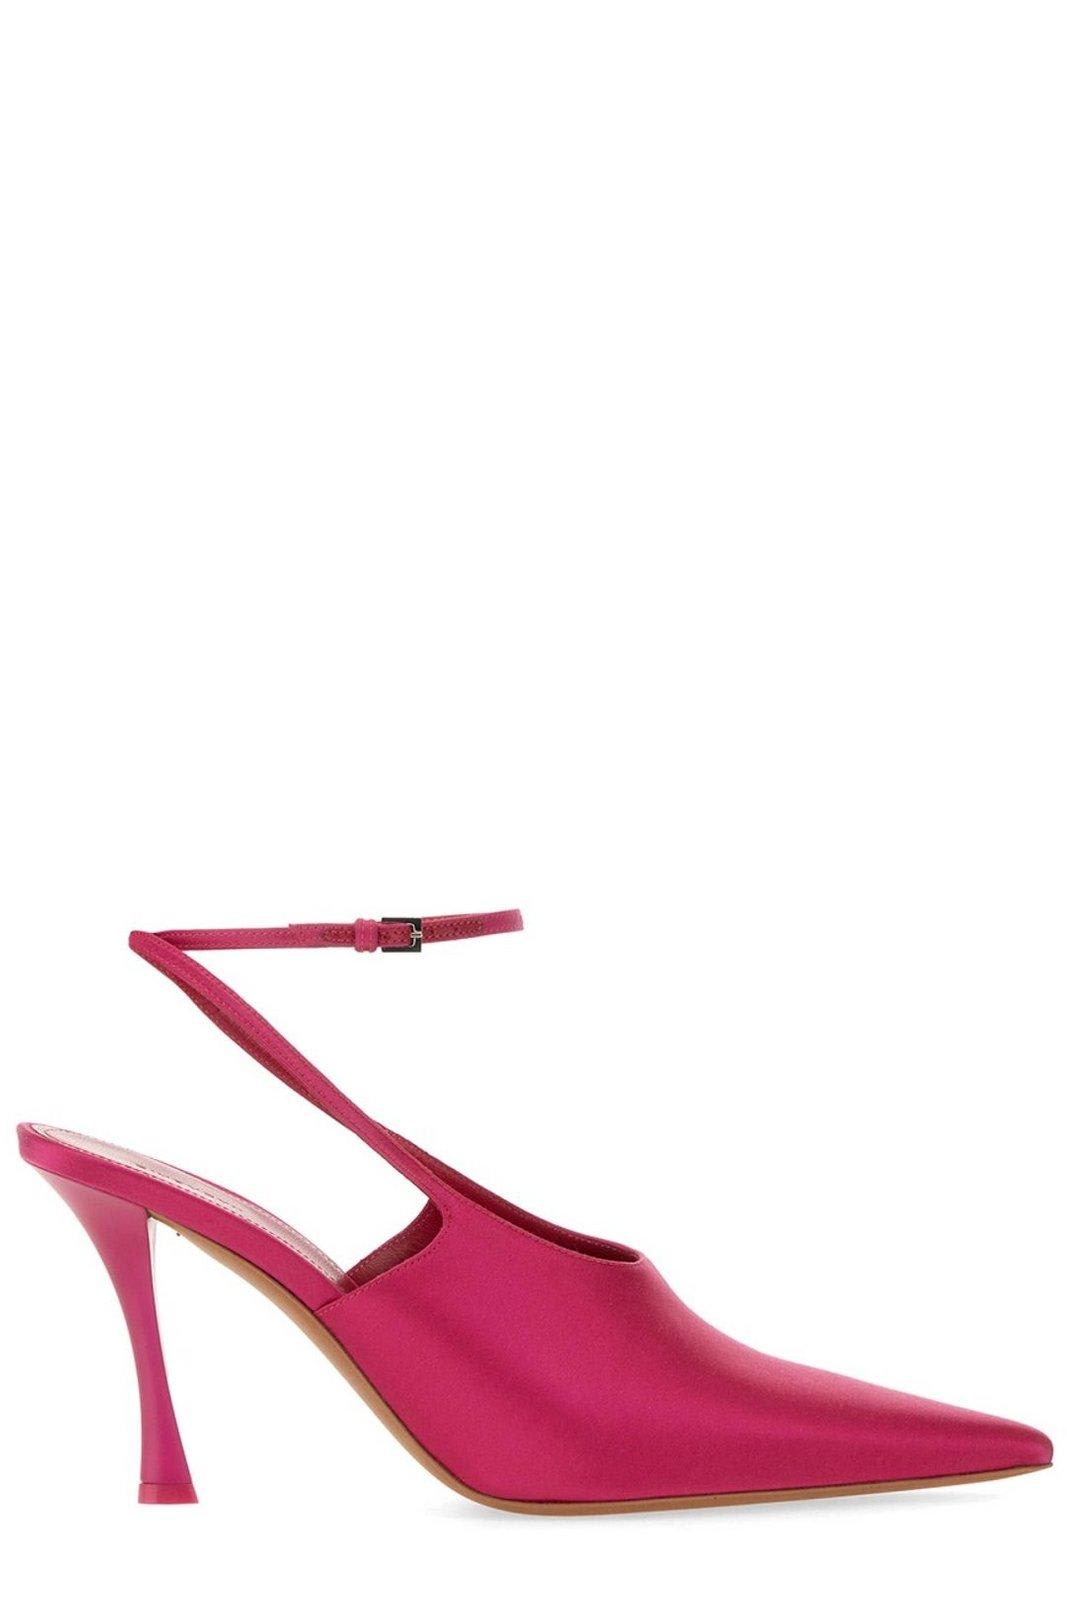 Givenchy Satin Show Slinback Pumps In Pink